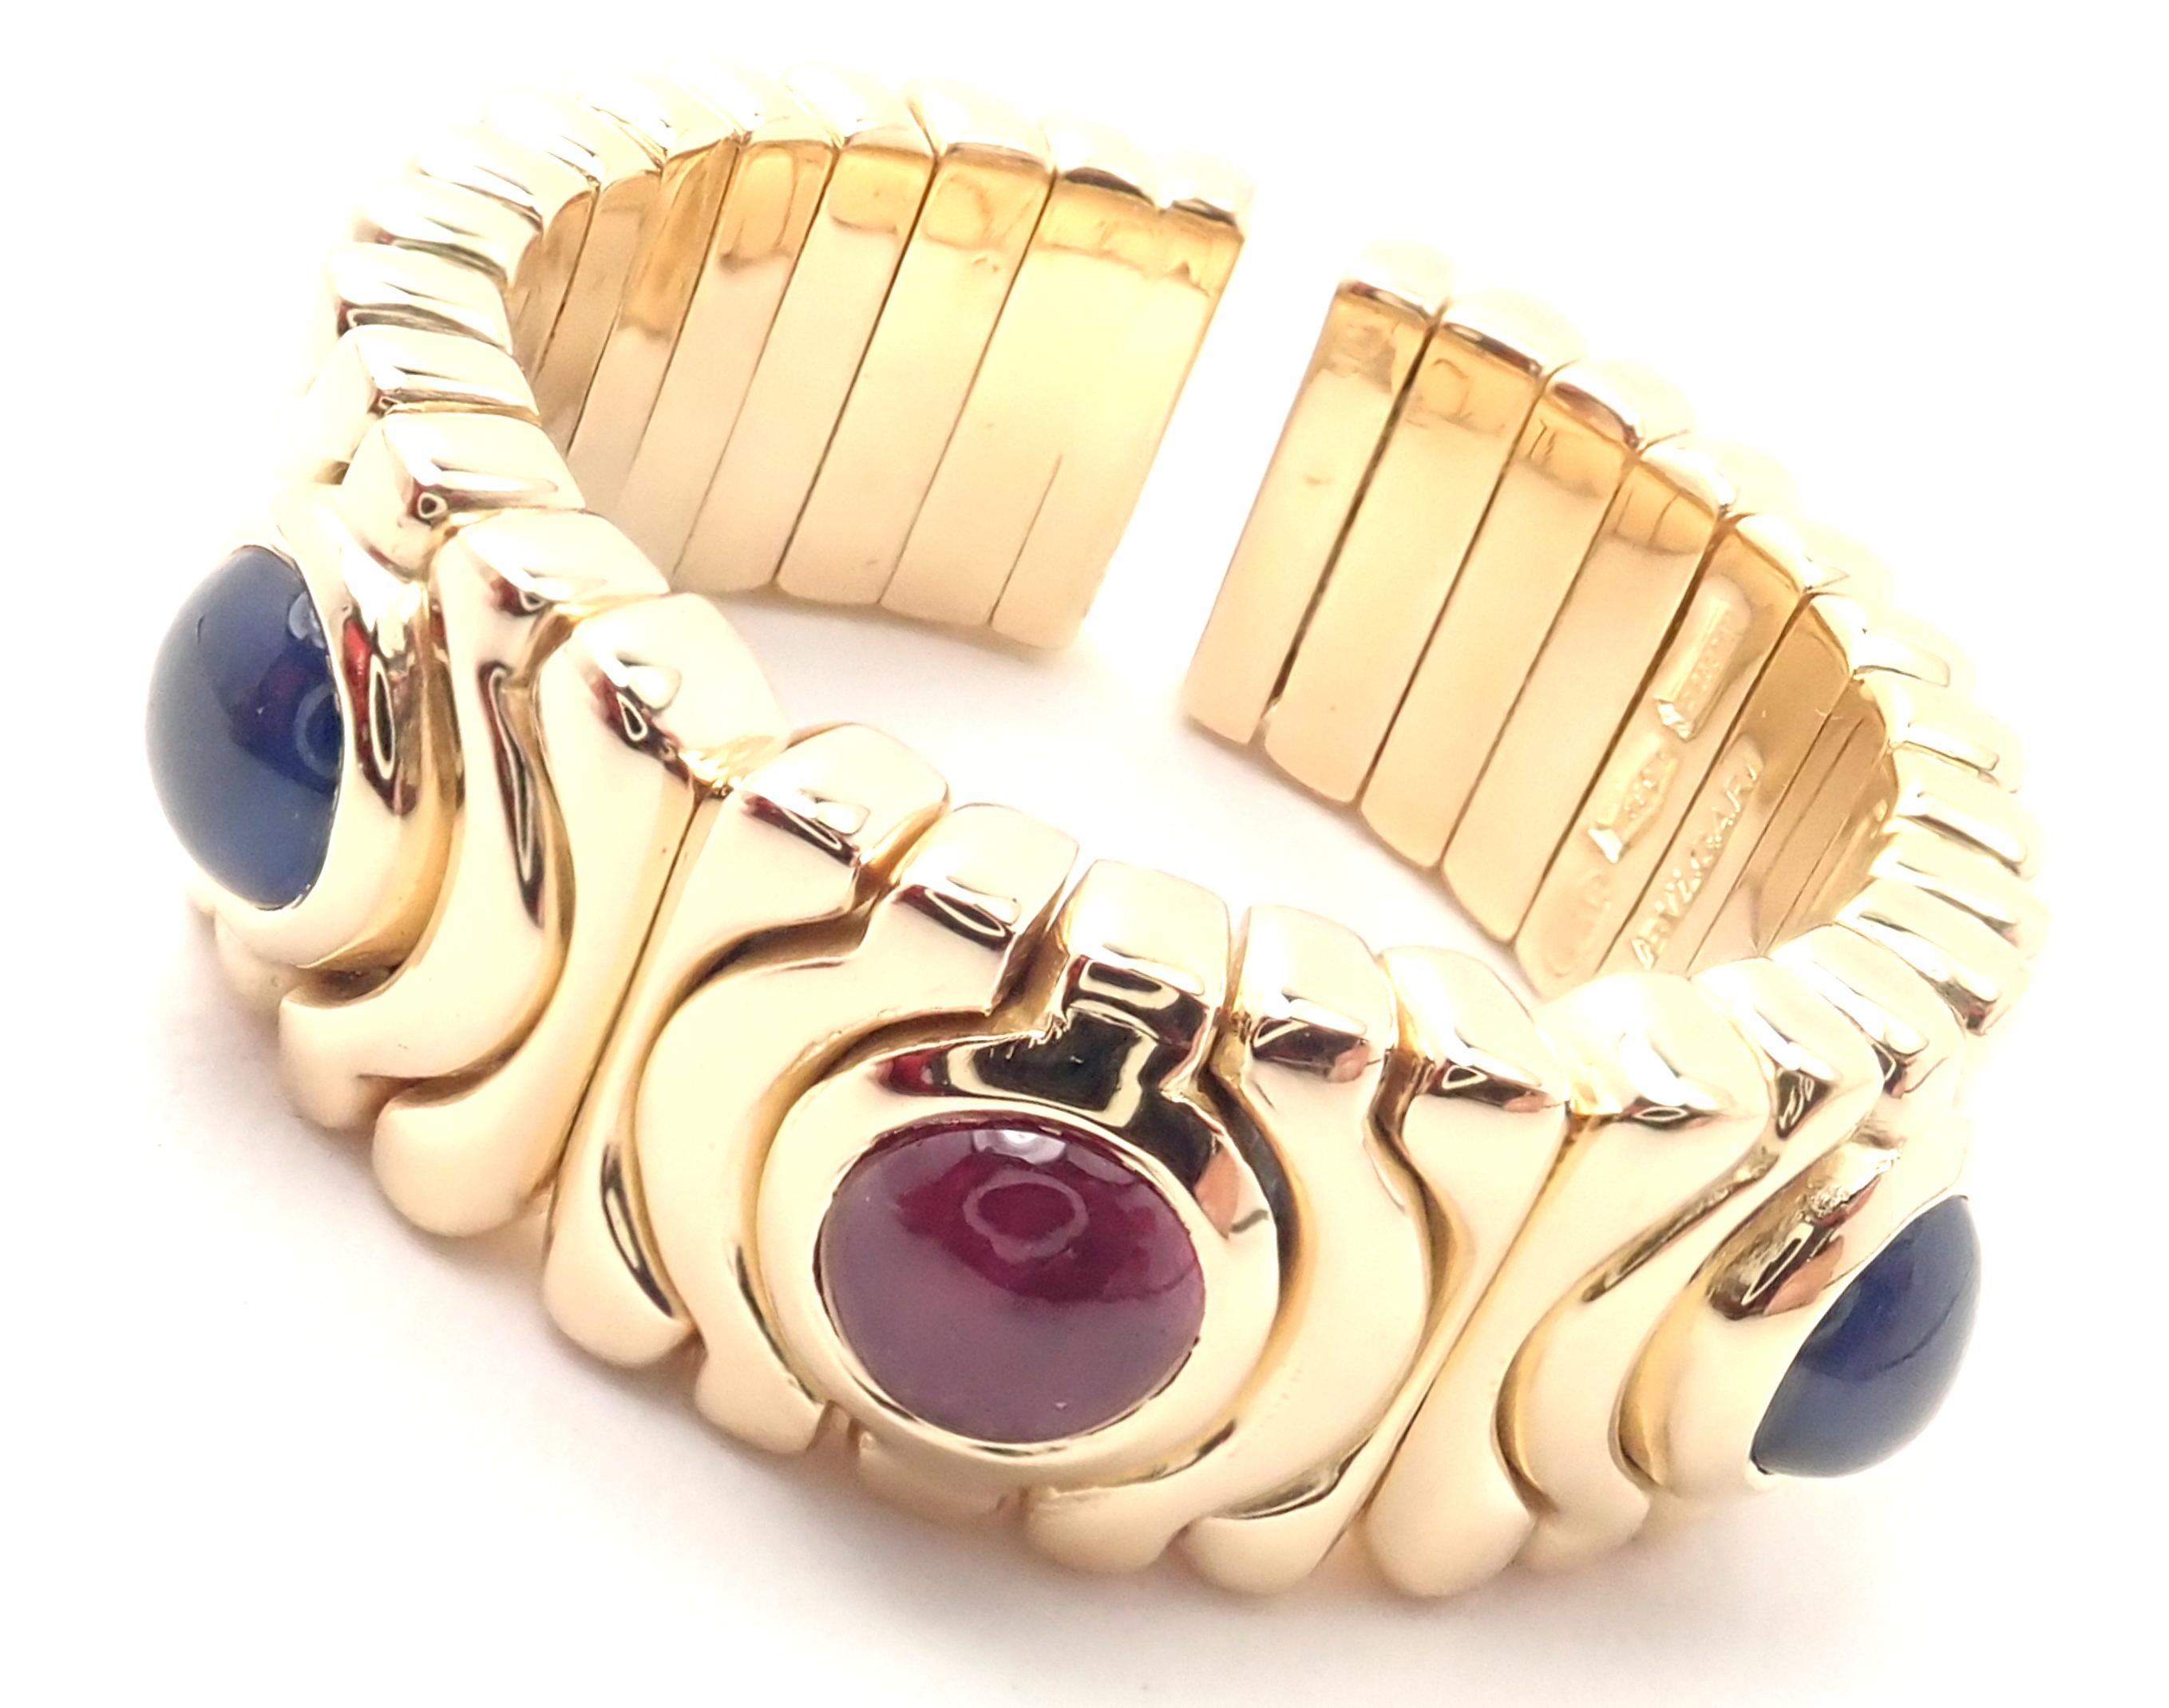 18k Yellow Gold Parentesi Sapphire And Ruby Band Ring by Bulgari. 
'With 2 Round Cabochon Sapphire 4mm each
1 Round Cabochon Ruby 4mm
Details: 
Ring Size: 7.5
Weight: 14.8 grams
Width: 8mm
Stamped Hallmarks: Bulgaria, 750, 2337AL
*Free Shipping